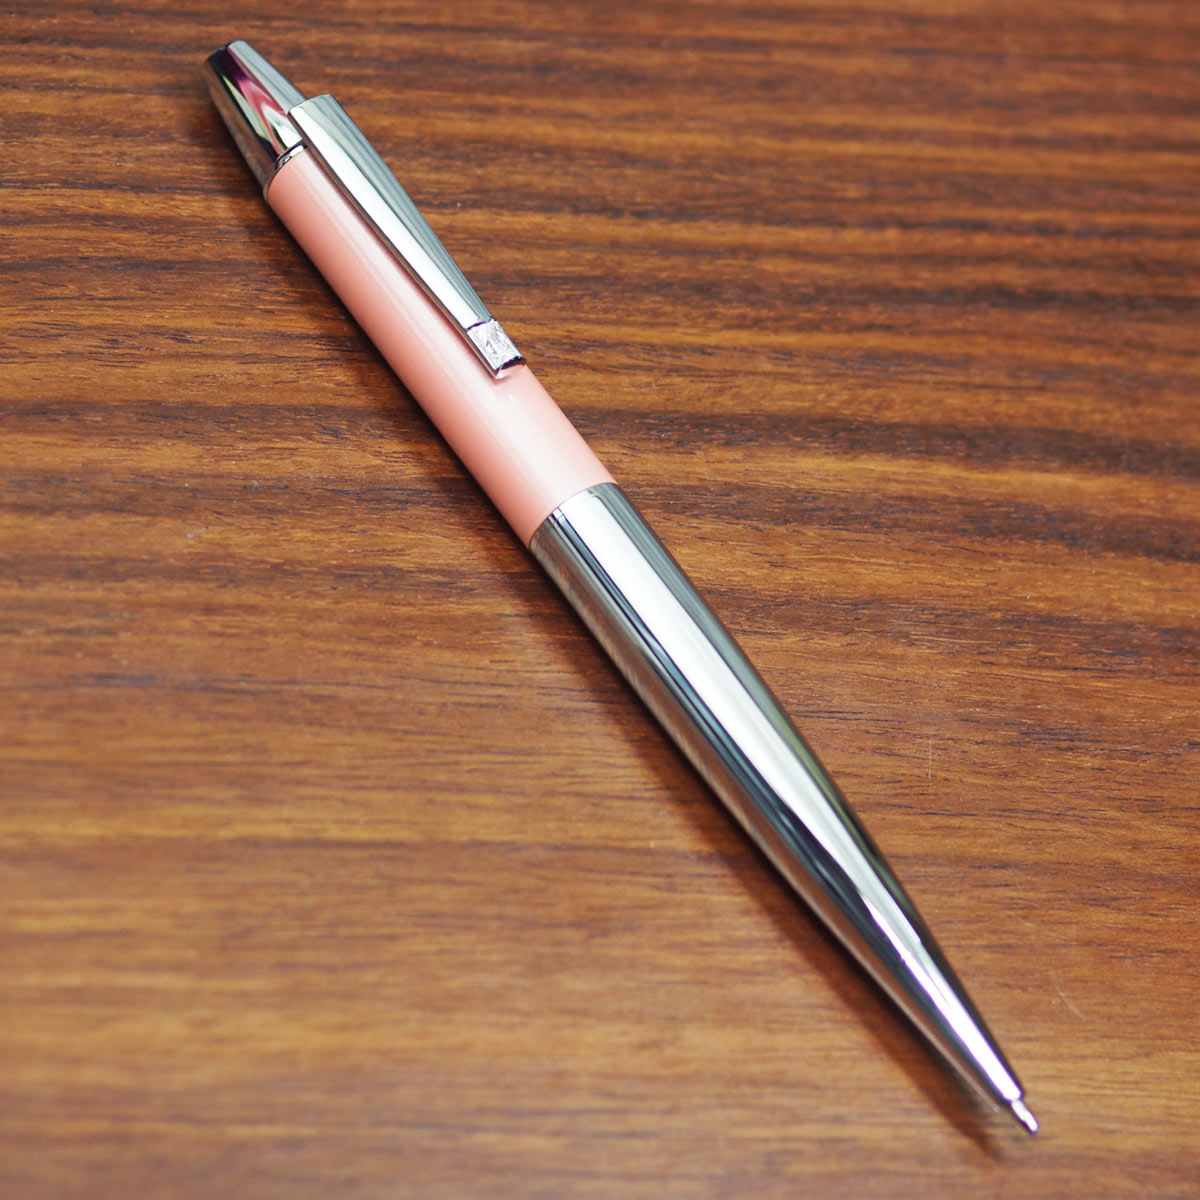 Hero SH202 Silver Color Body With Peach Color Cap And Clip On Stone Medium Tip Twist Type Ball Pen SKU 23533